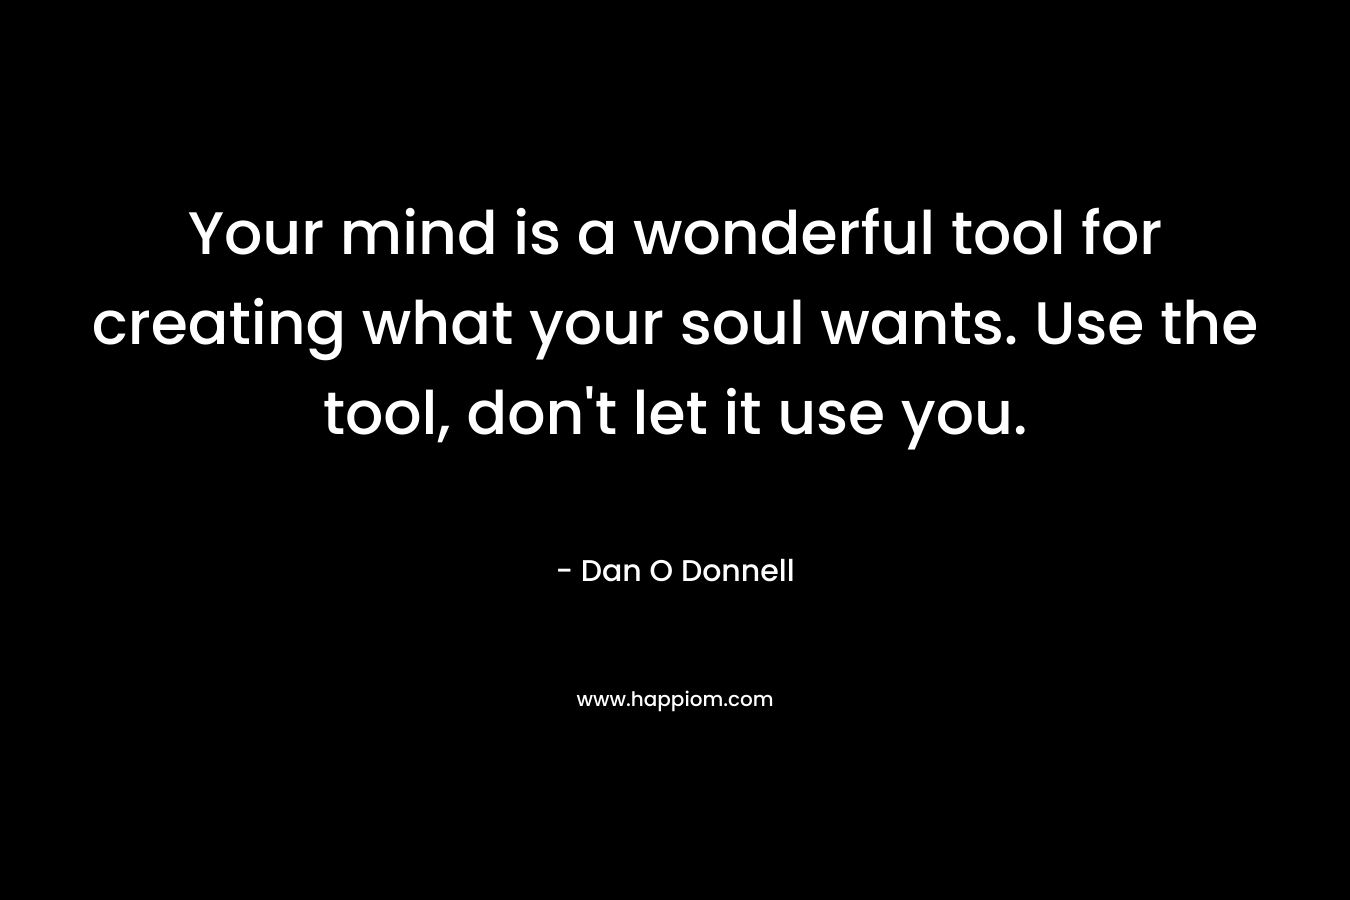 Your mind is a wonderful tool for creating what your soul wants. Use the tool, don't let it use you.